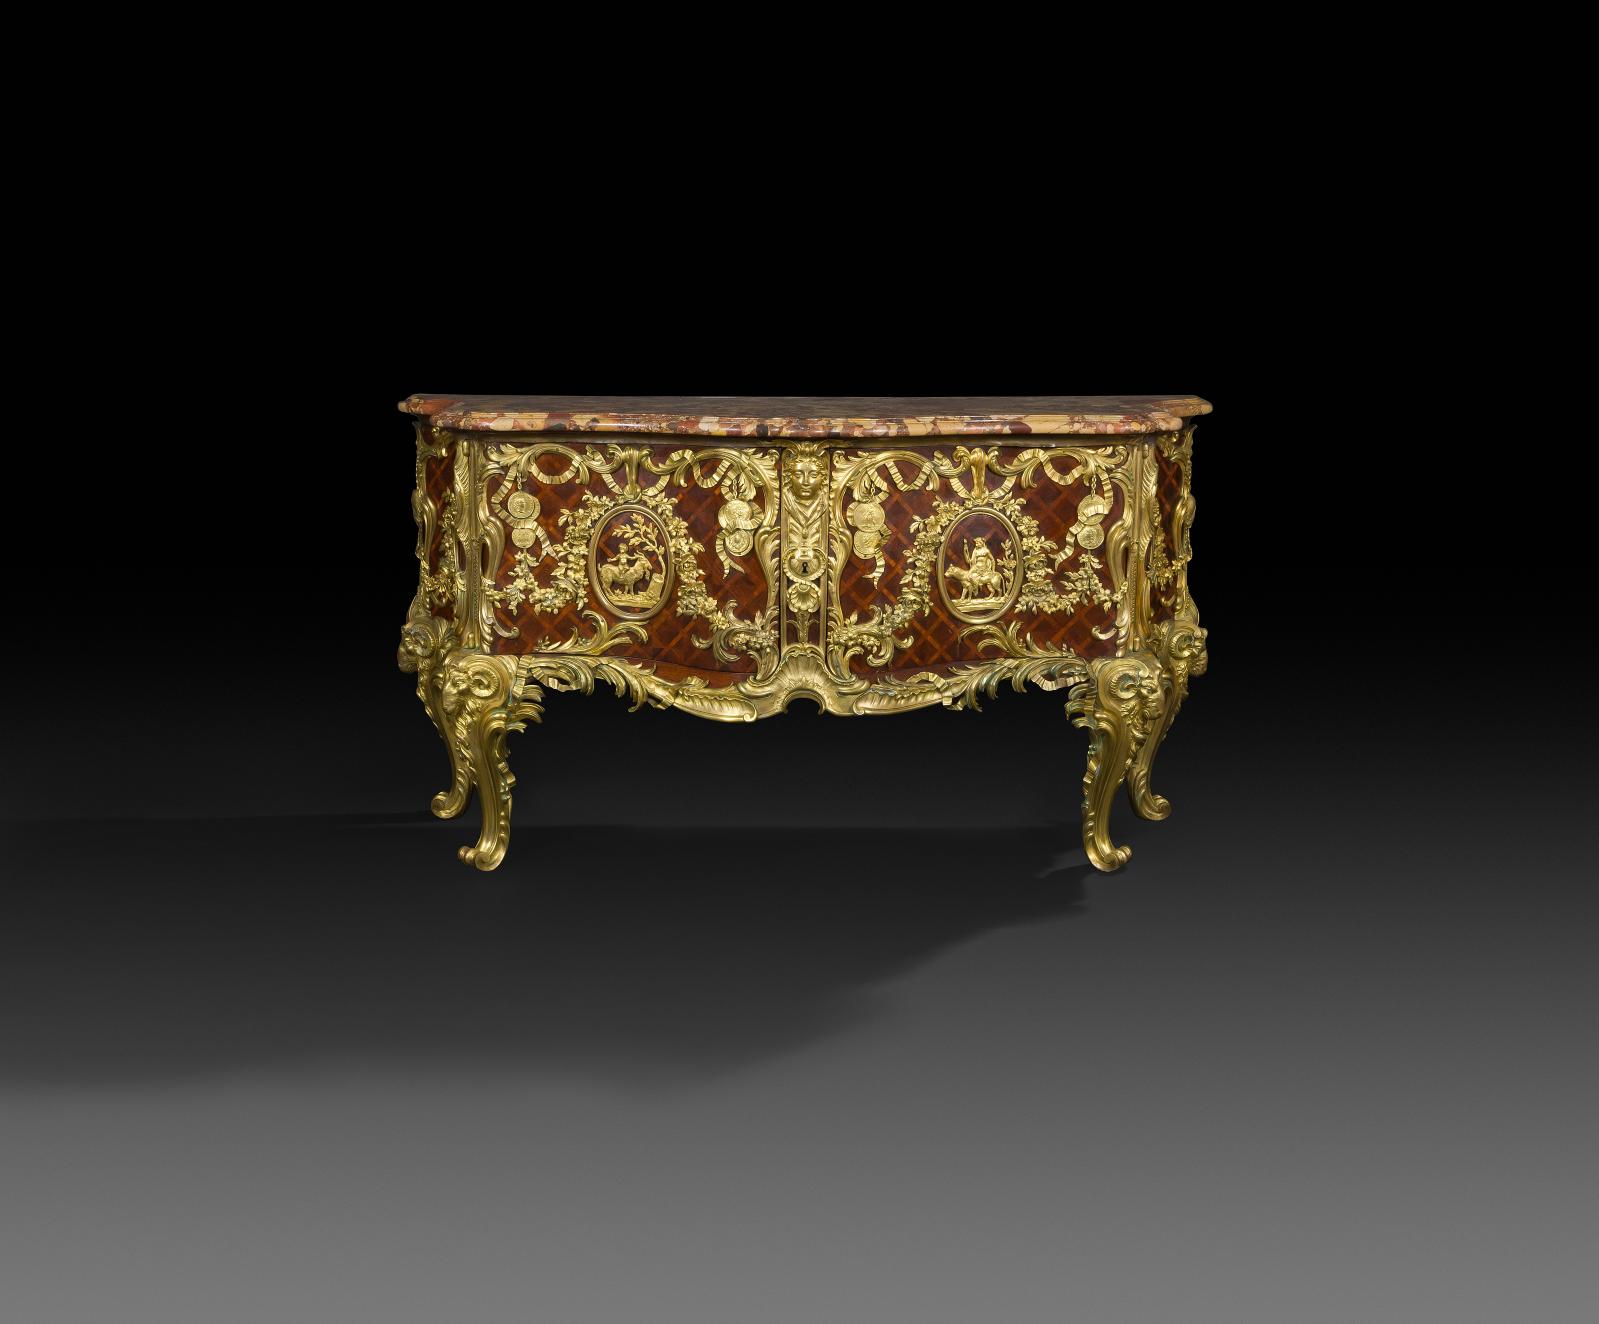 French Furniture in the Rococo Style